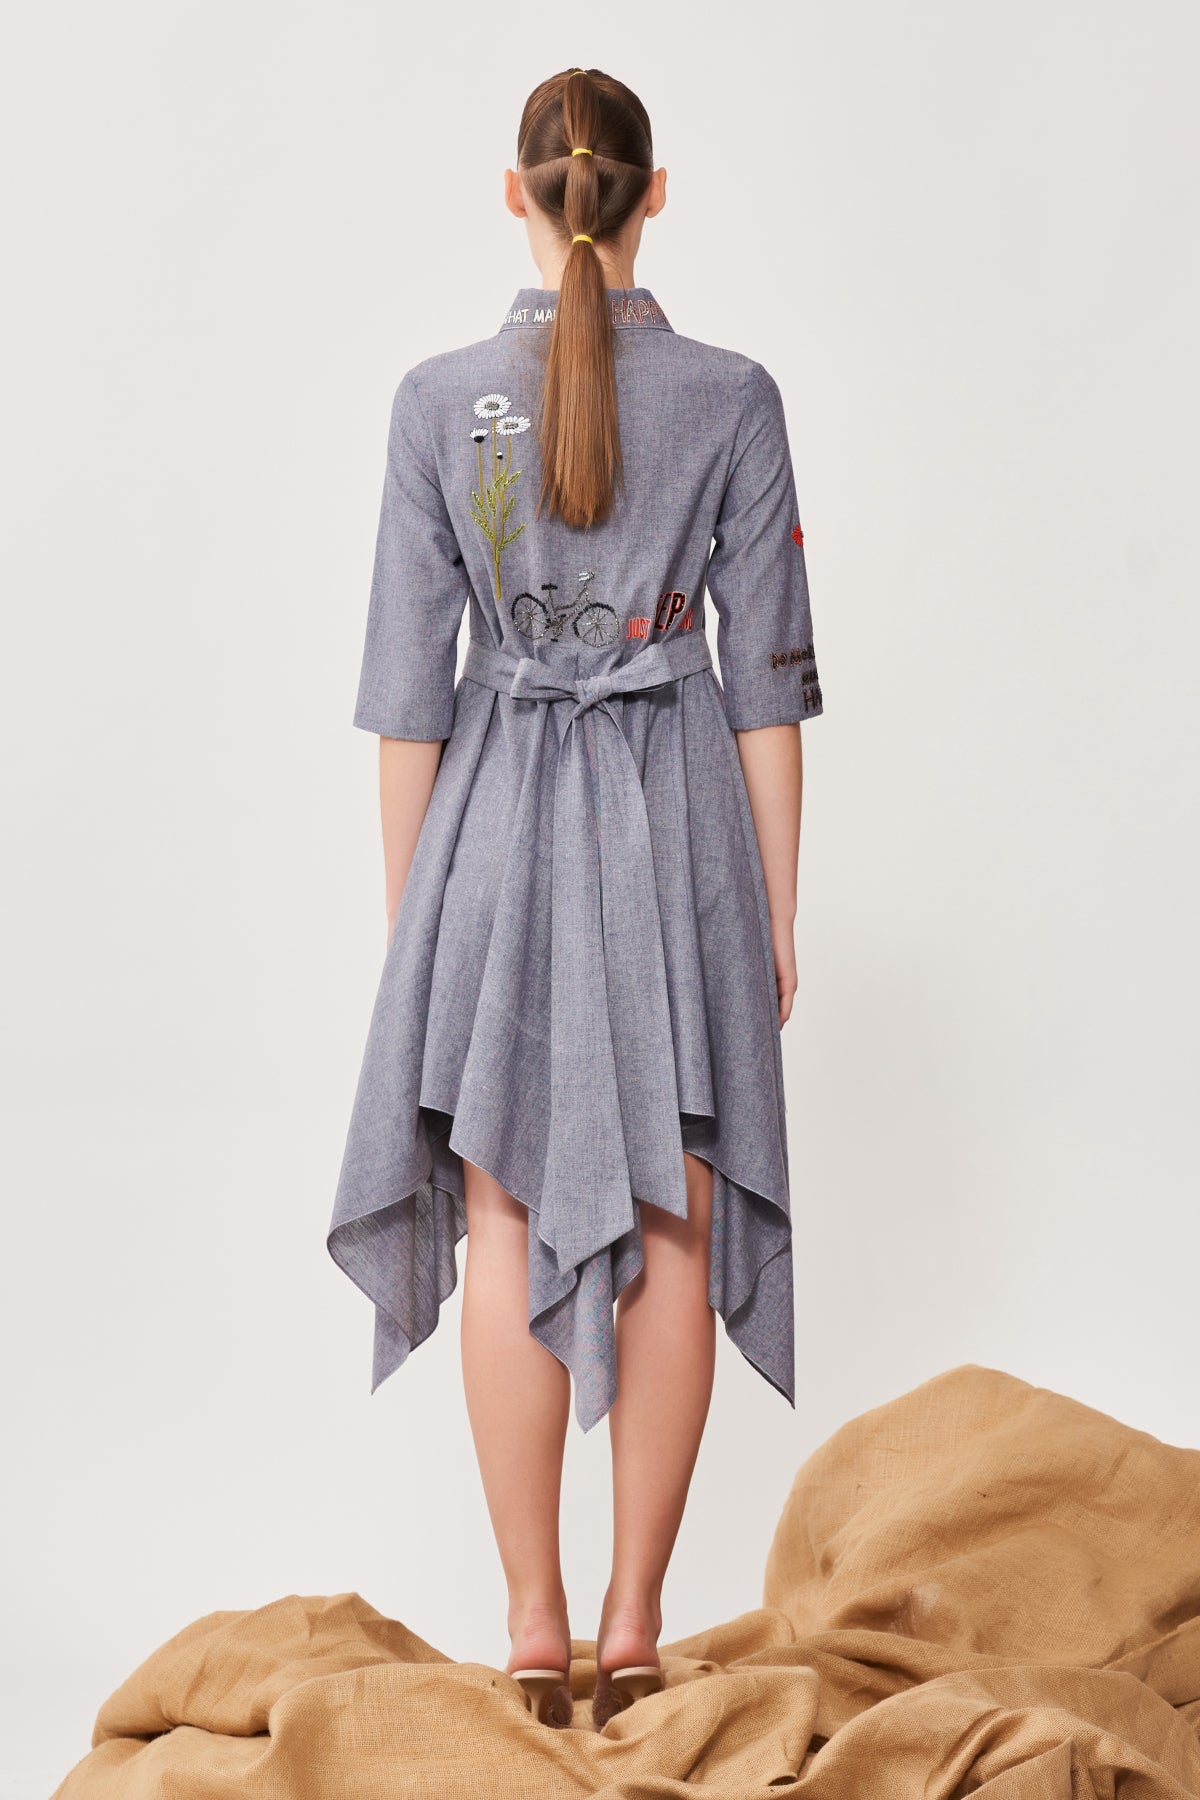 Keep Going Draped Dress With Belt at the Back